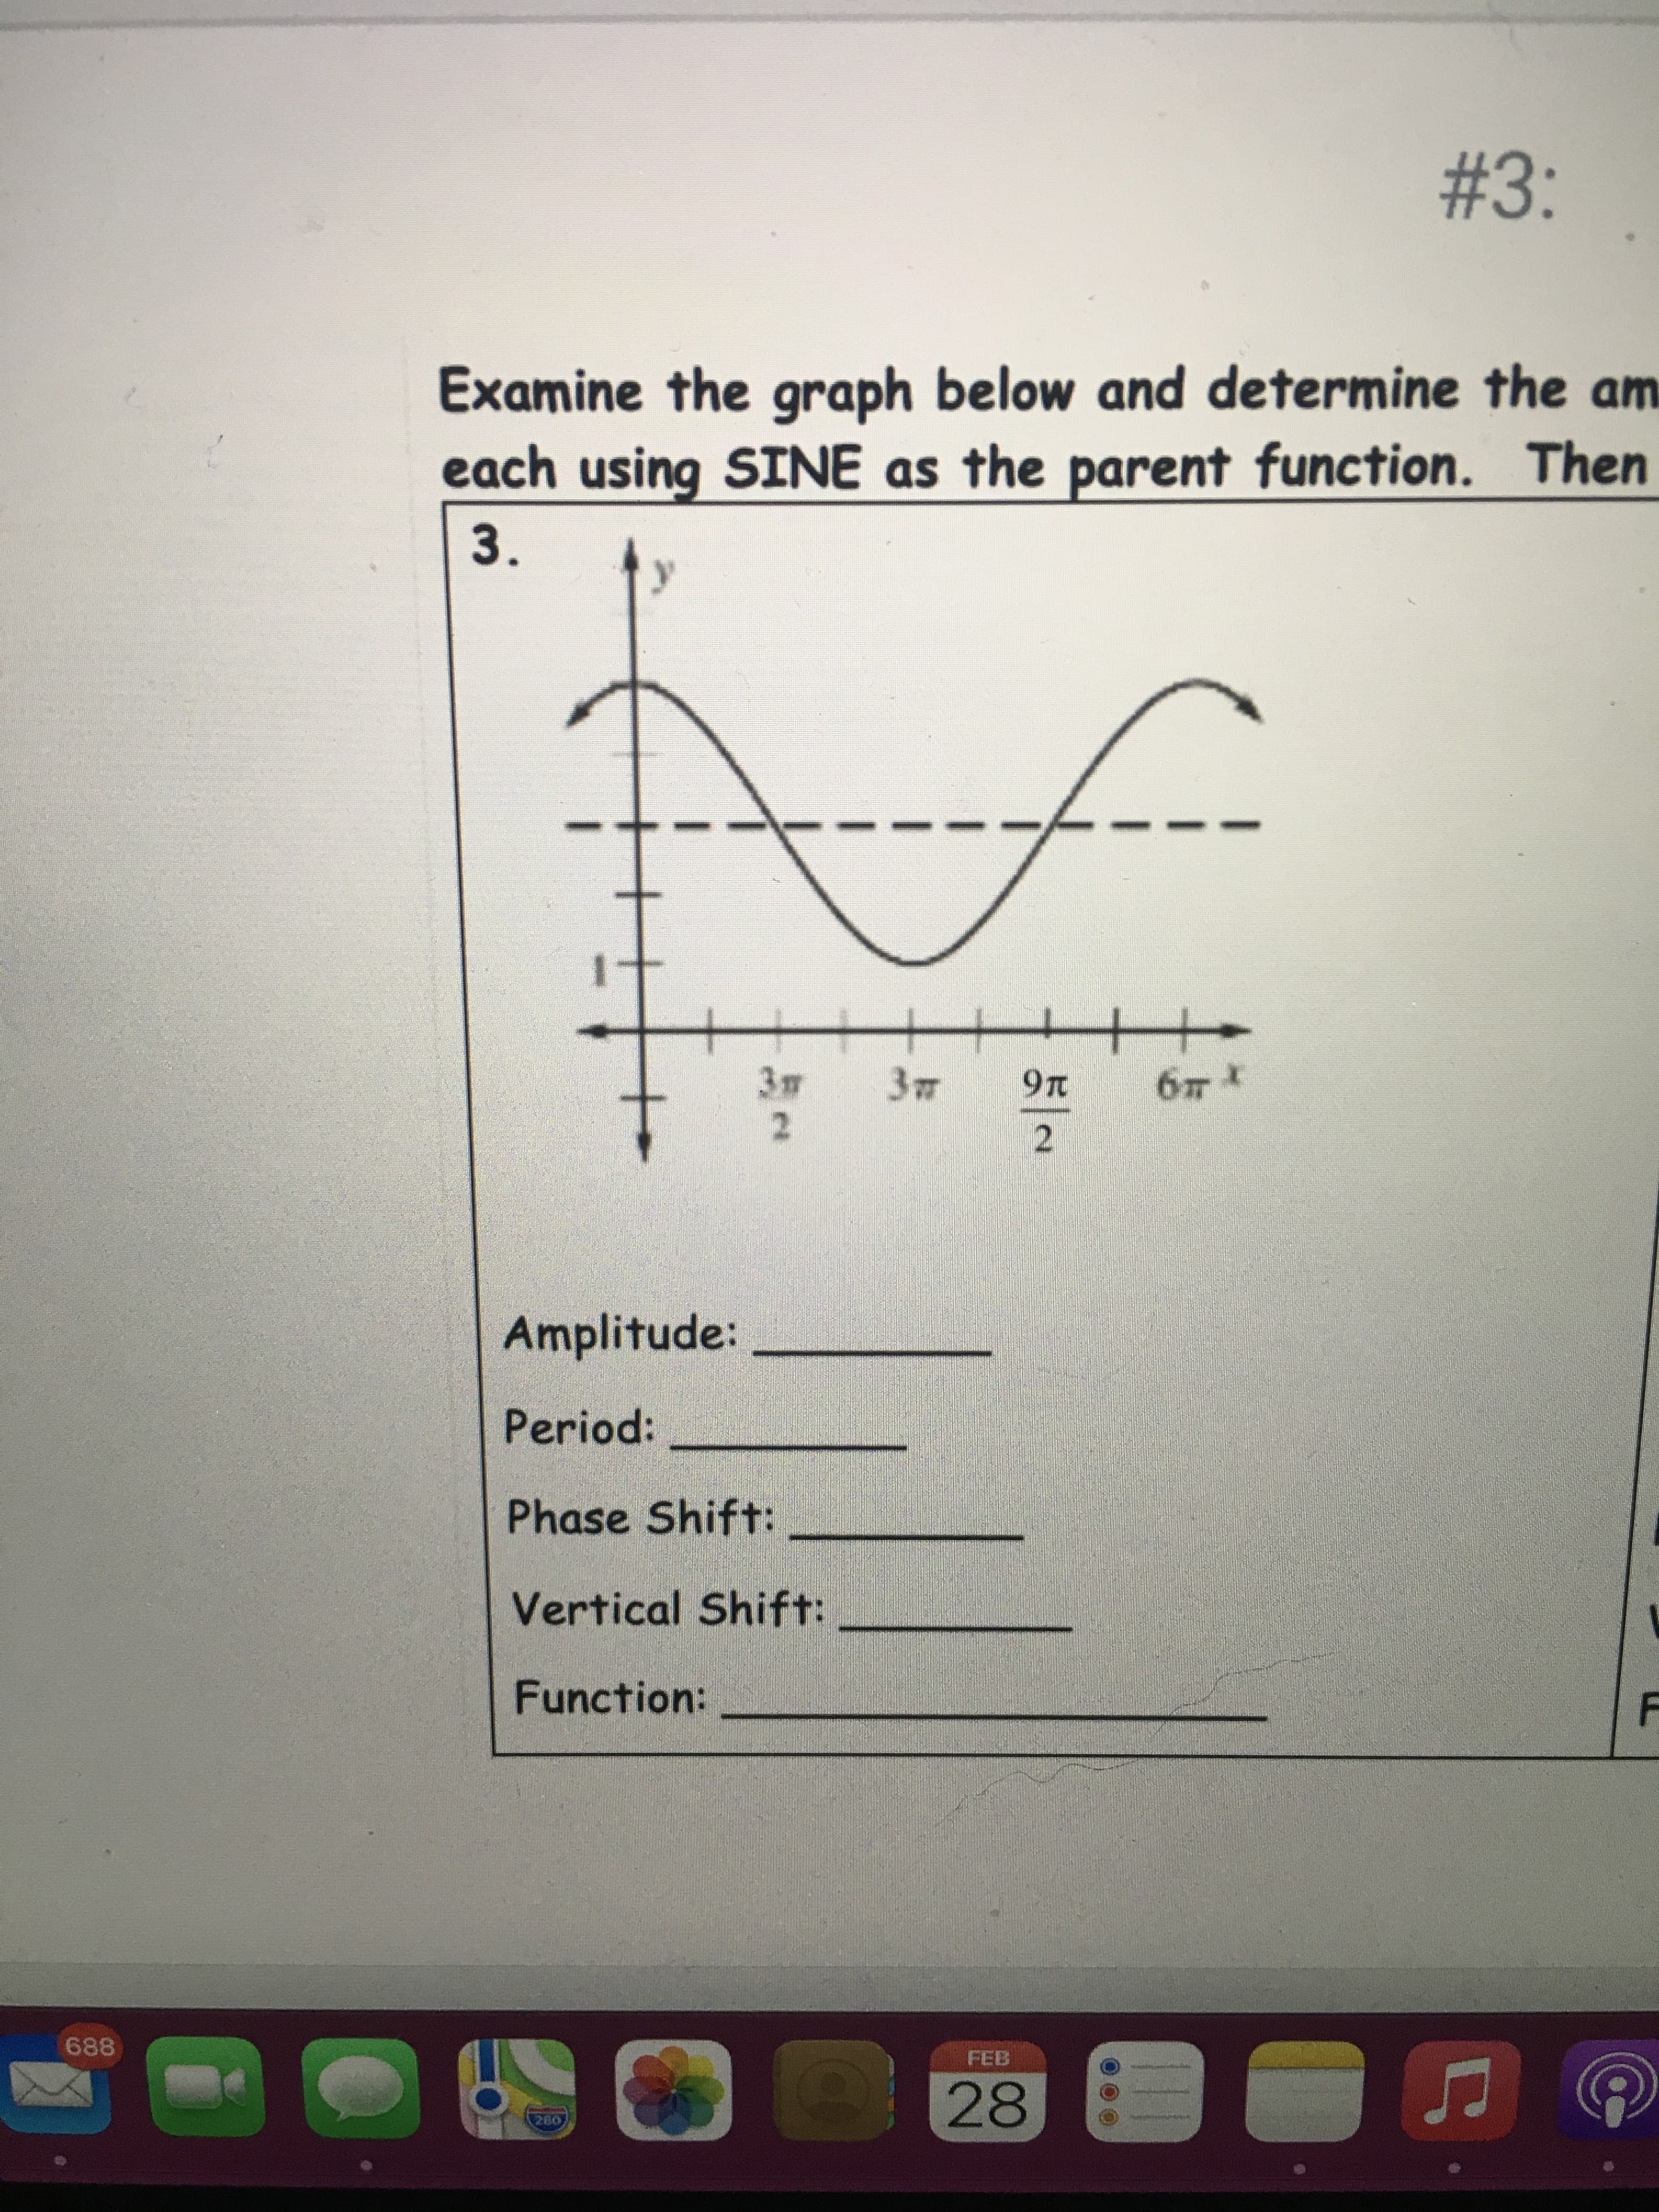 3.
#3:
Examine the graph below and determine the am
each using SINE as the parent function. Then
16
十+
2.
2.
Amplitude:
Period:
Phase Shift:
Vertical Shift:
Function:
688
FEB
28
